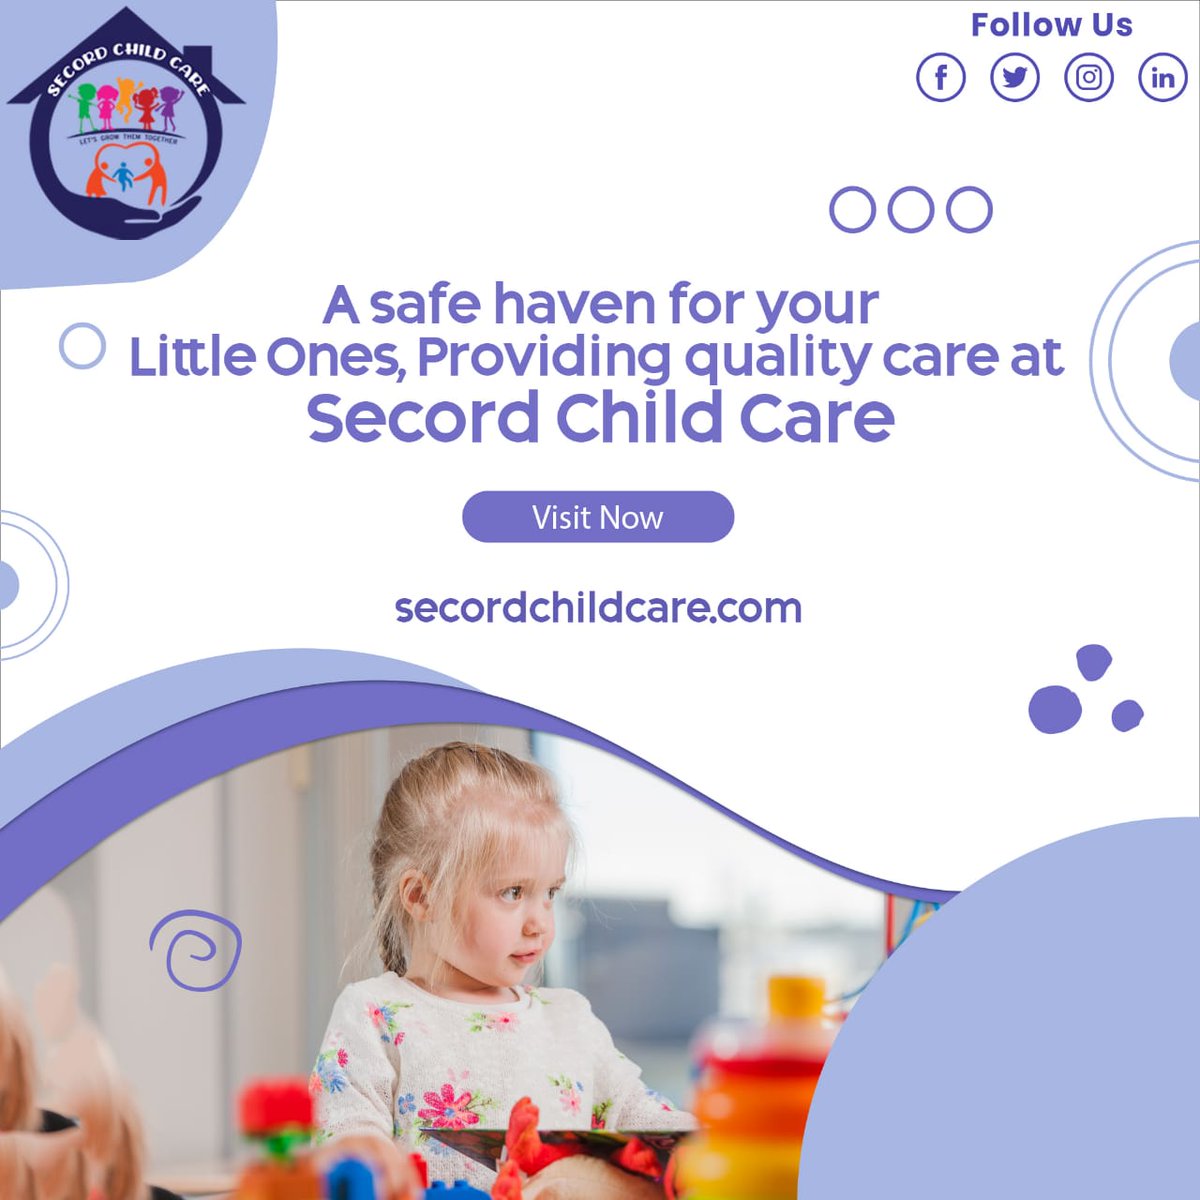 A safe haven for your little ones, providing quality care at #secordchildcare 
#childcare #childcareprofessional #childcarecenter #secord #edmonton  #licensedchildcare #daycare #licenseddaycare #childcareprofessional